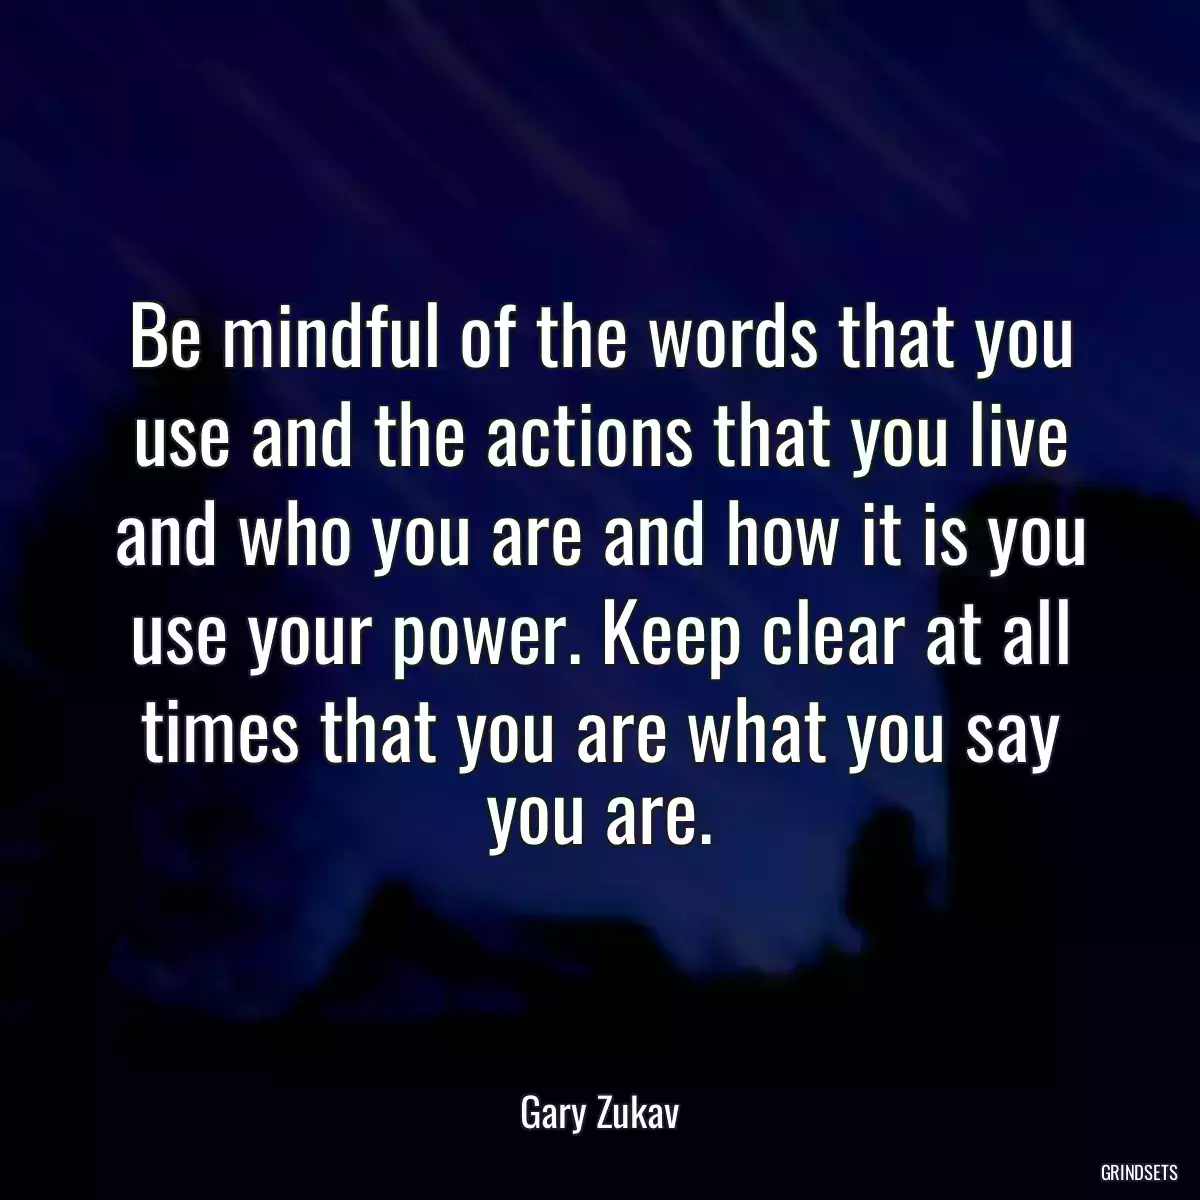 Be mindful of the words that you use and the actions that you live and who you are and how it is you use your power. Keep clear at all times that you are what you say you are.